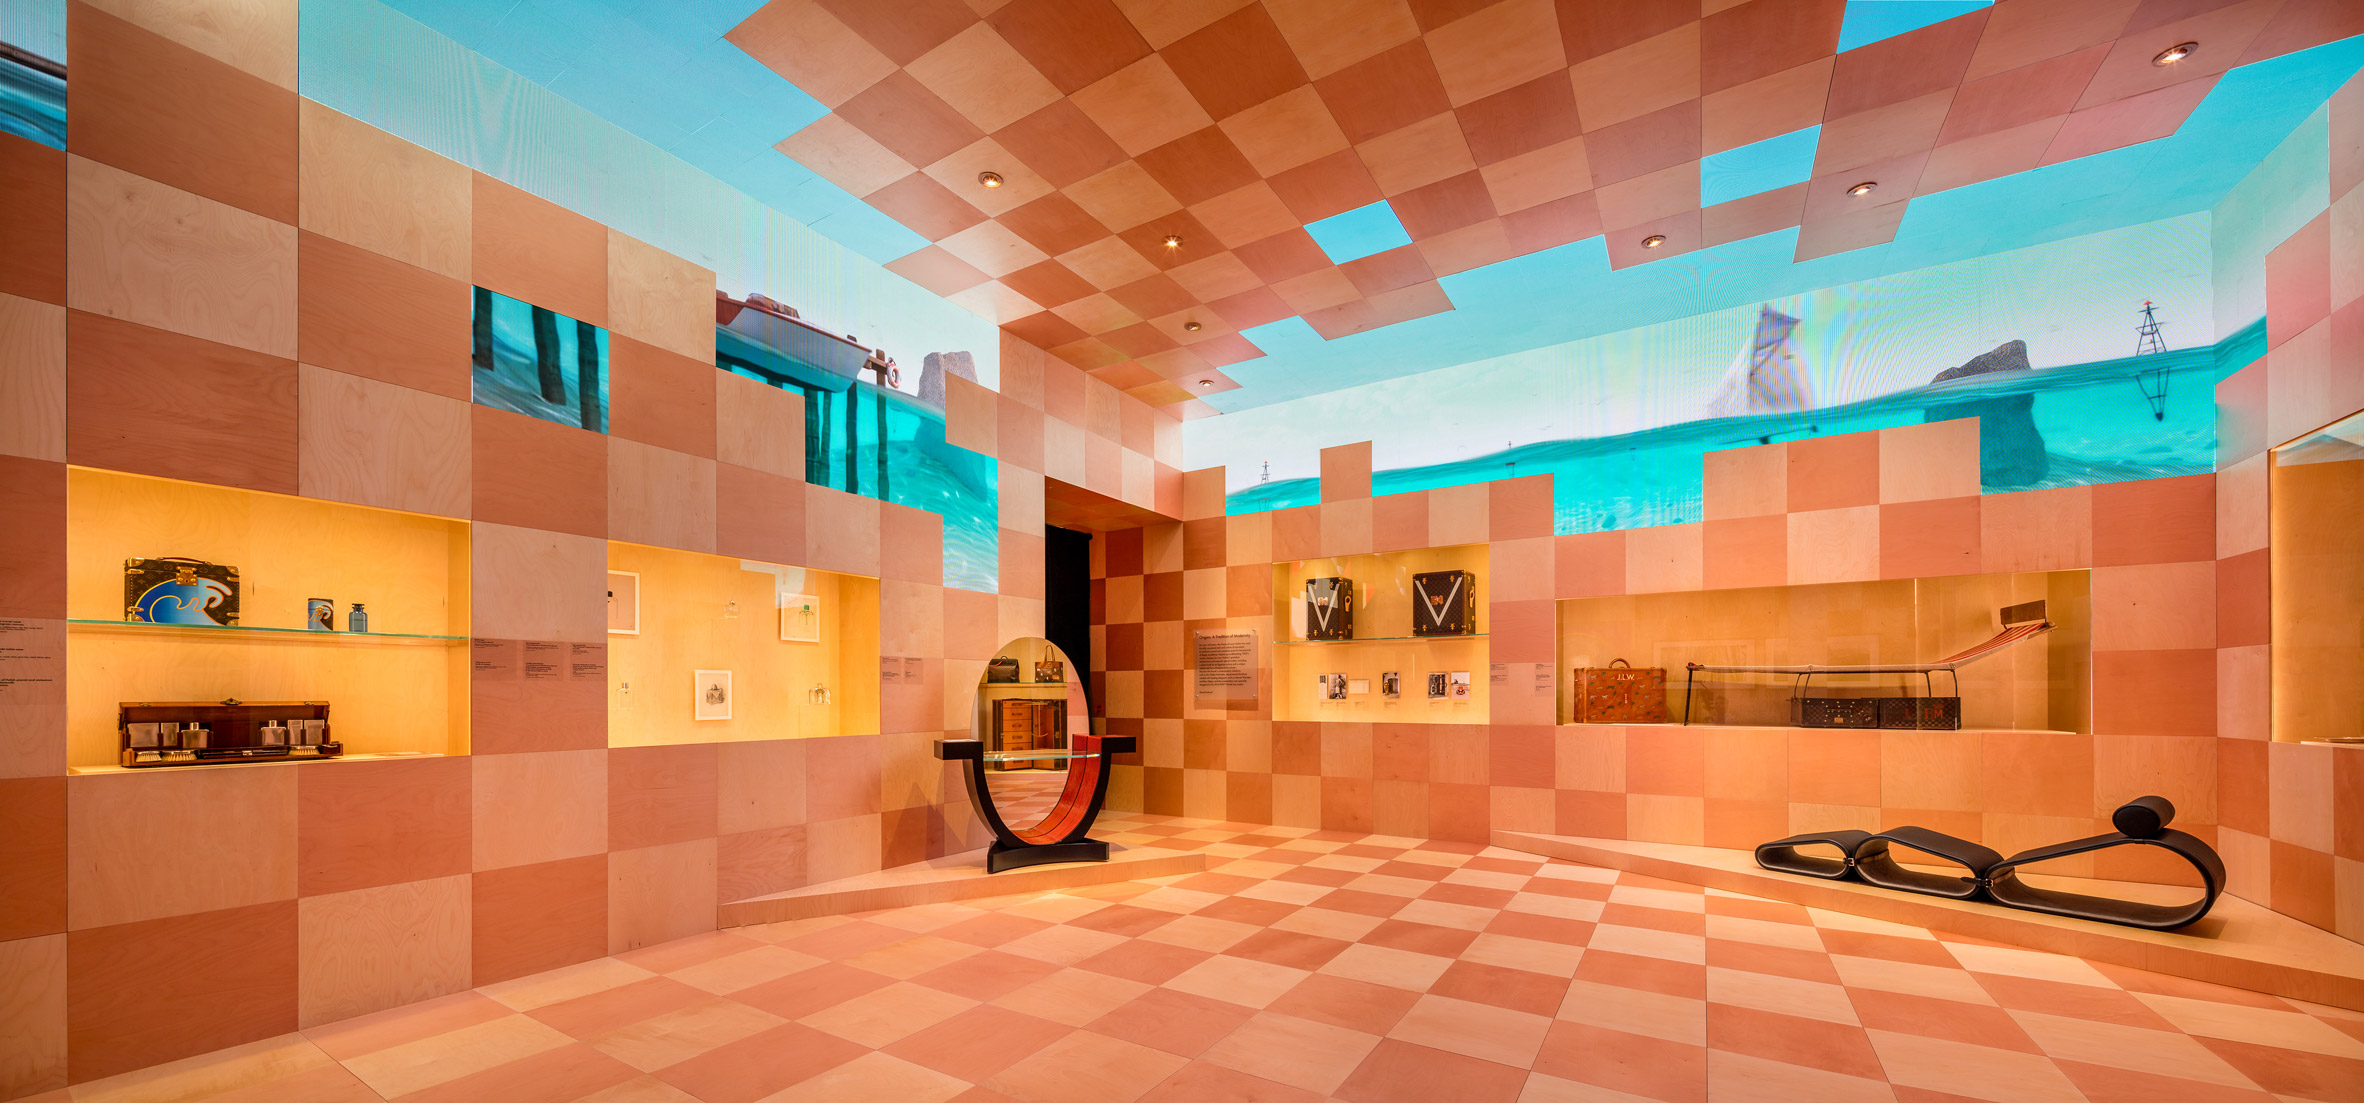 Explore 160 years of Louis Vuitton heritage at this pop-up exhibition in  Roppongi